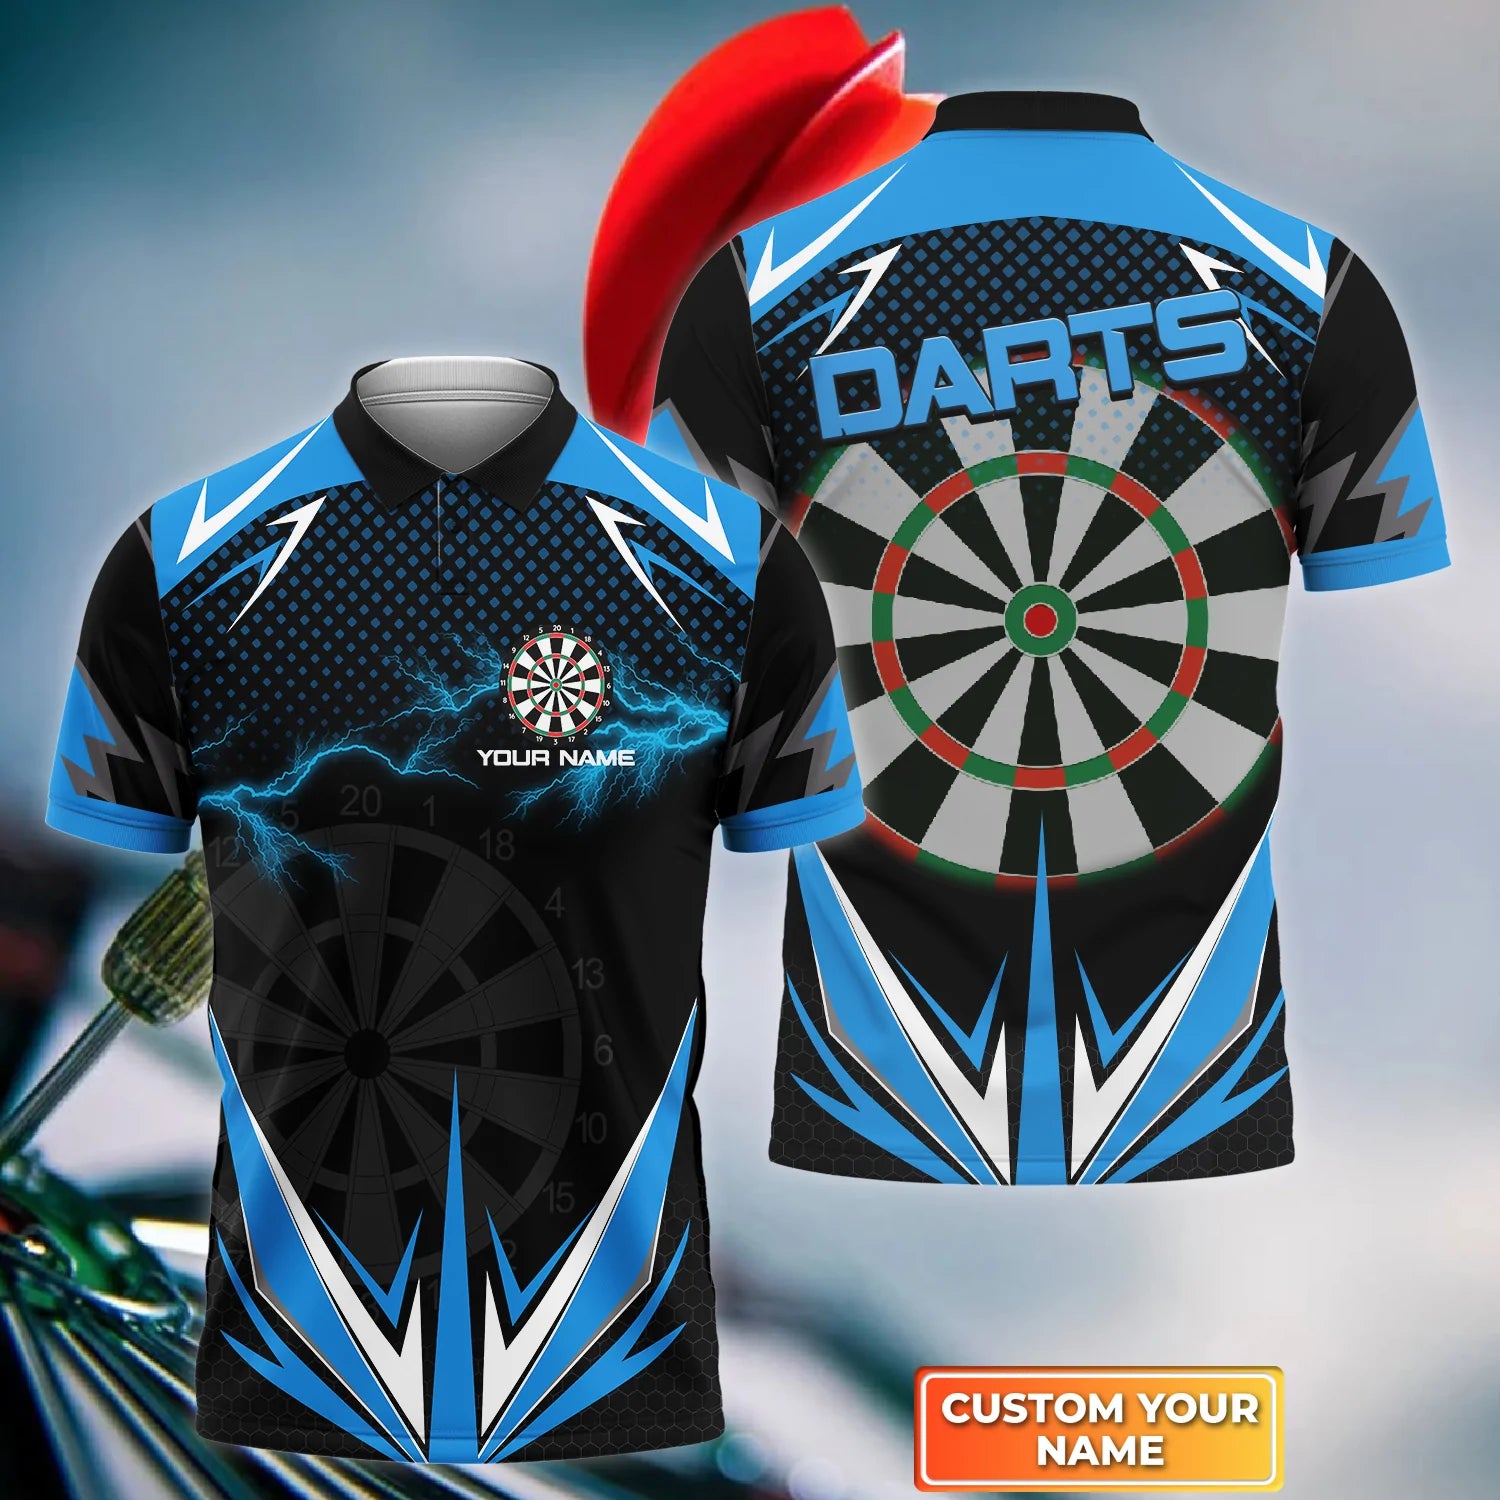 Polo Shirt for Darts Players: Blue Lightning 3D Design for Men and Teams – DP110